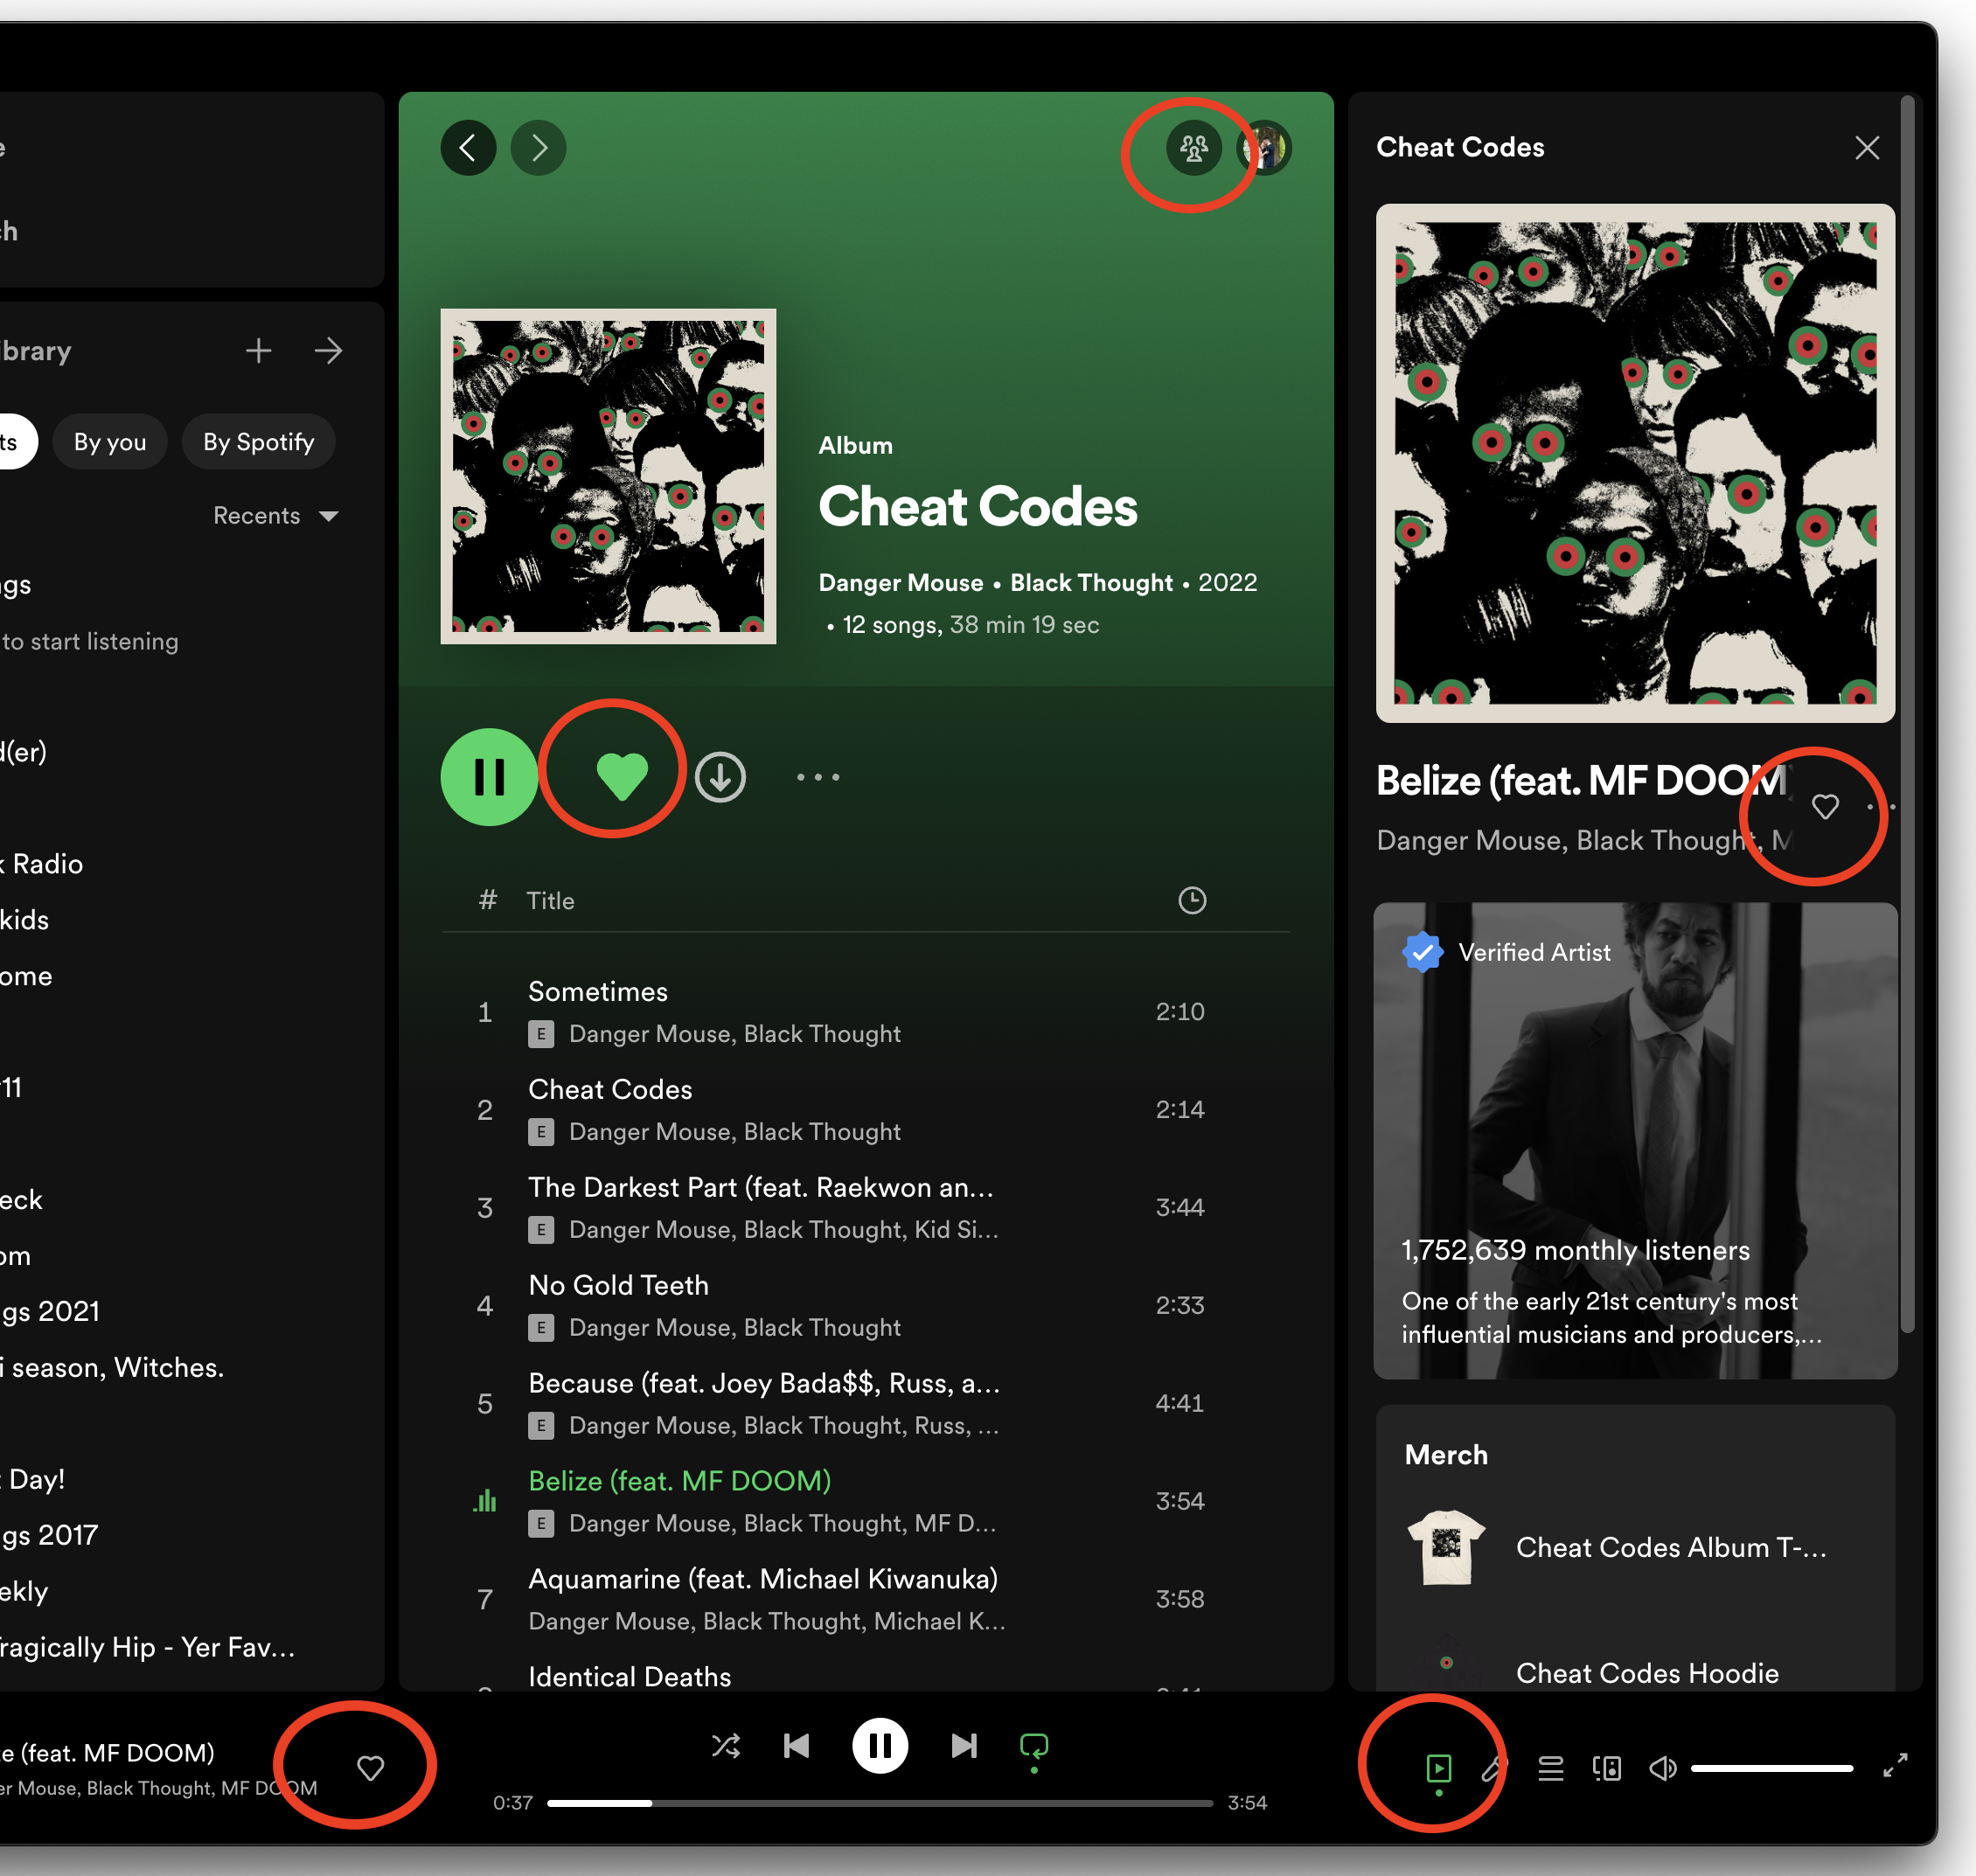 Spotify getting redesigned 'Your Library', 'Now Playing' views on